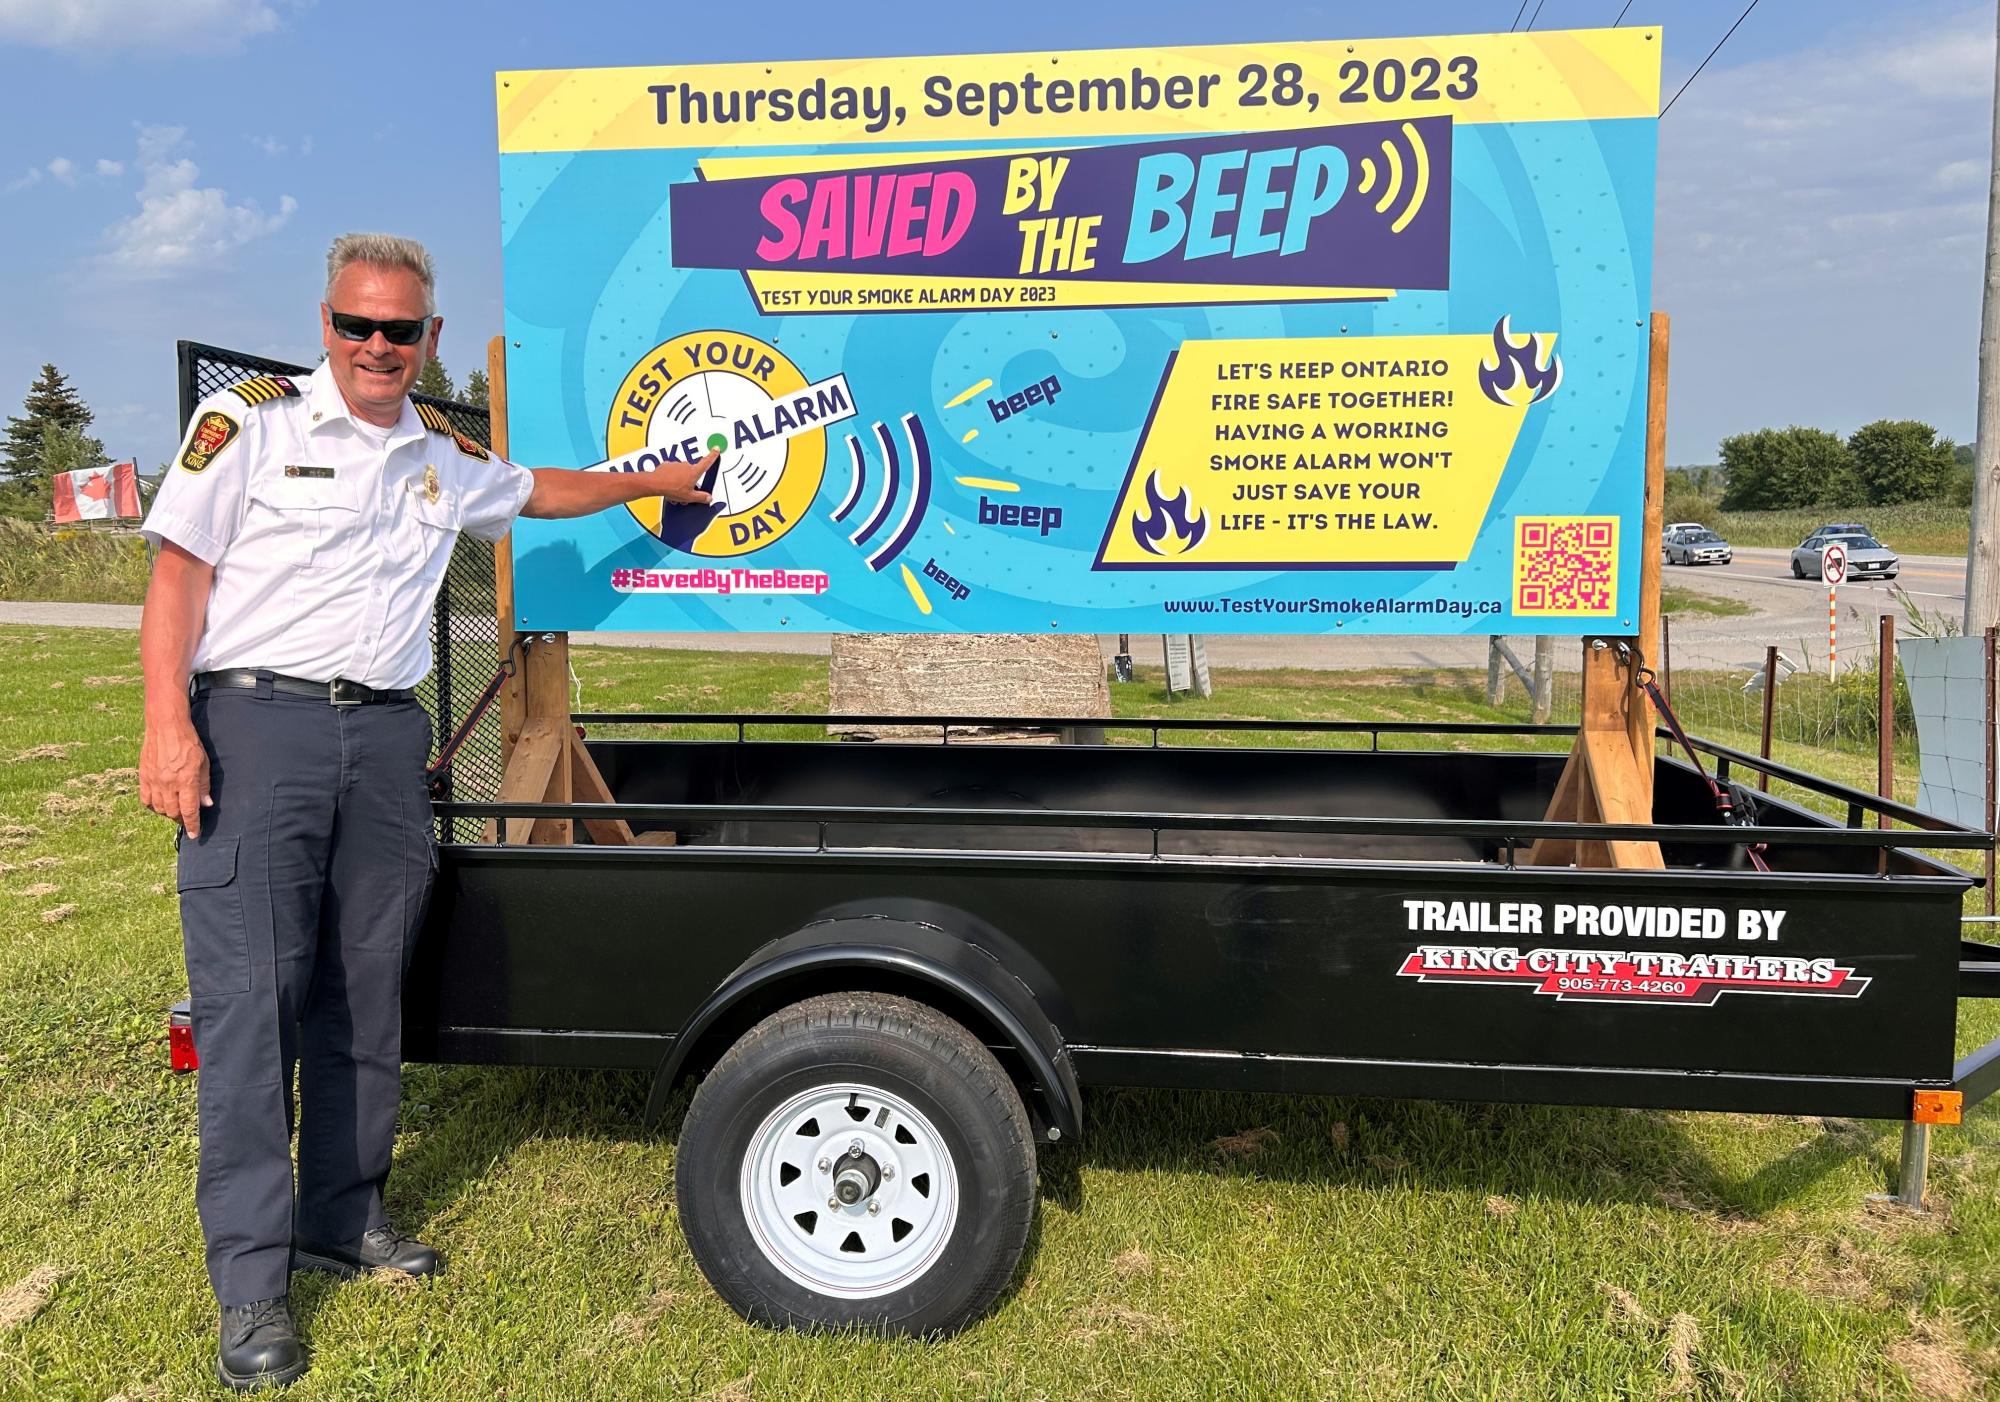 Fire Chief with Saved by the Beep sign